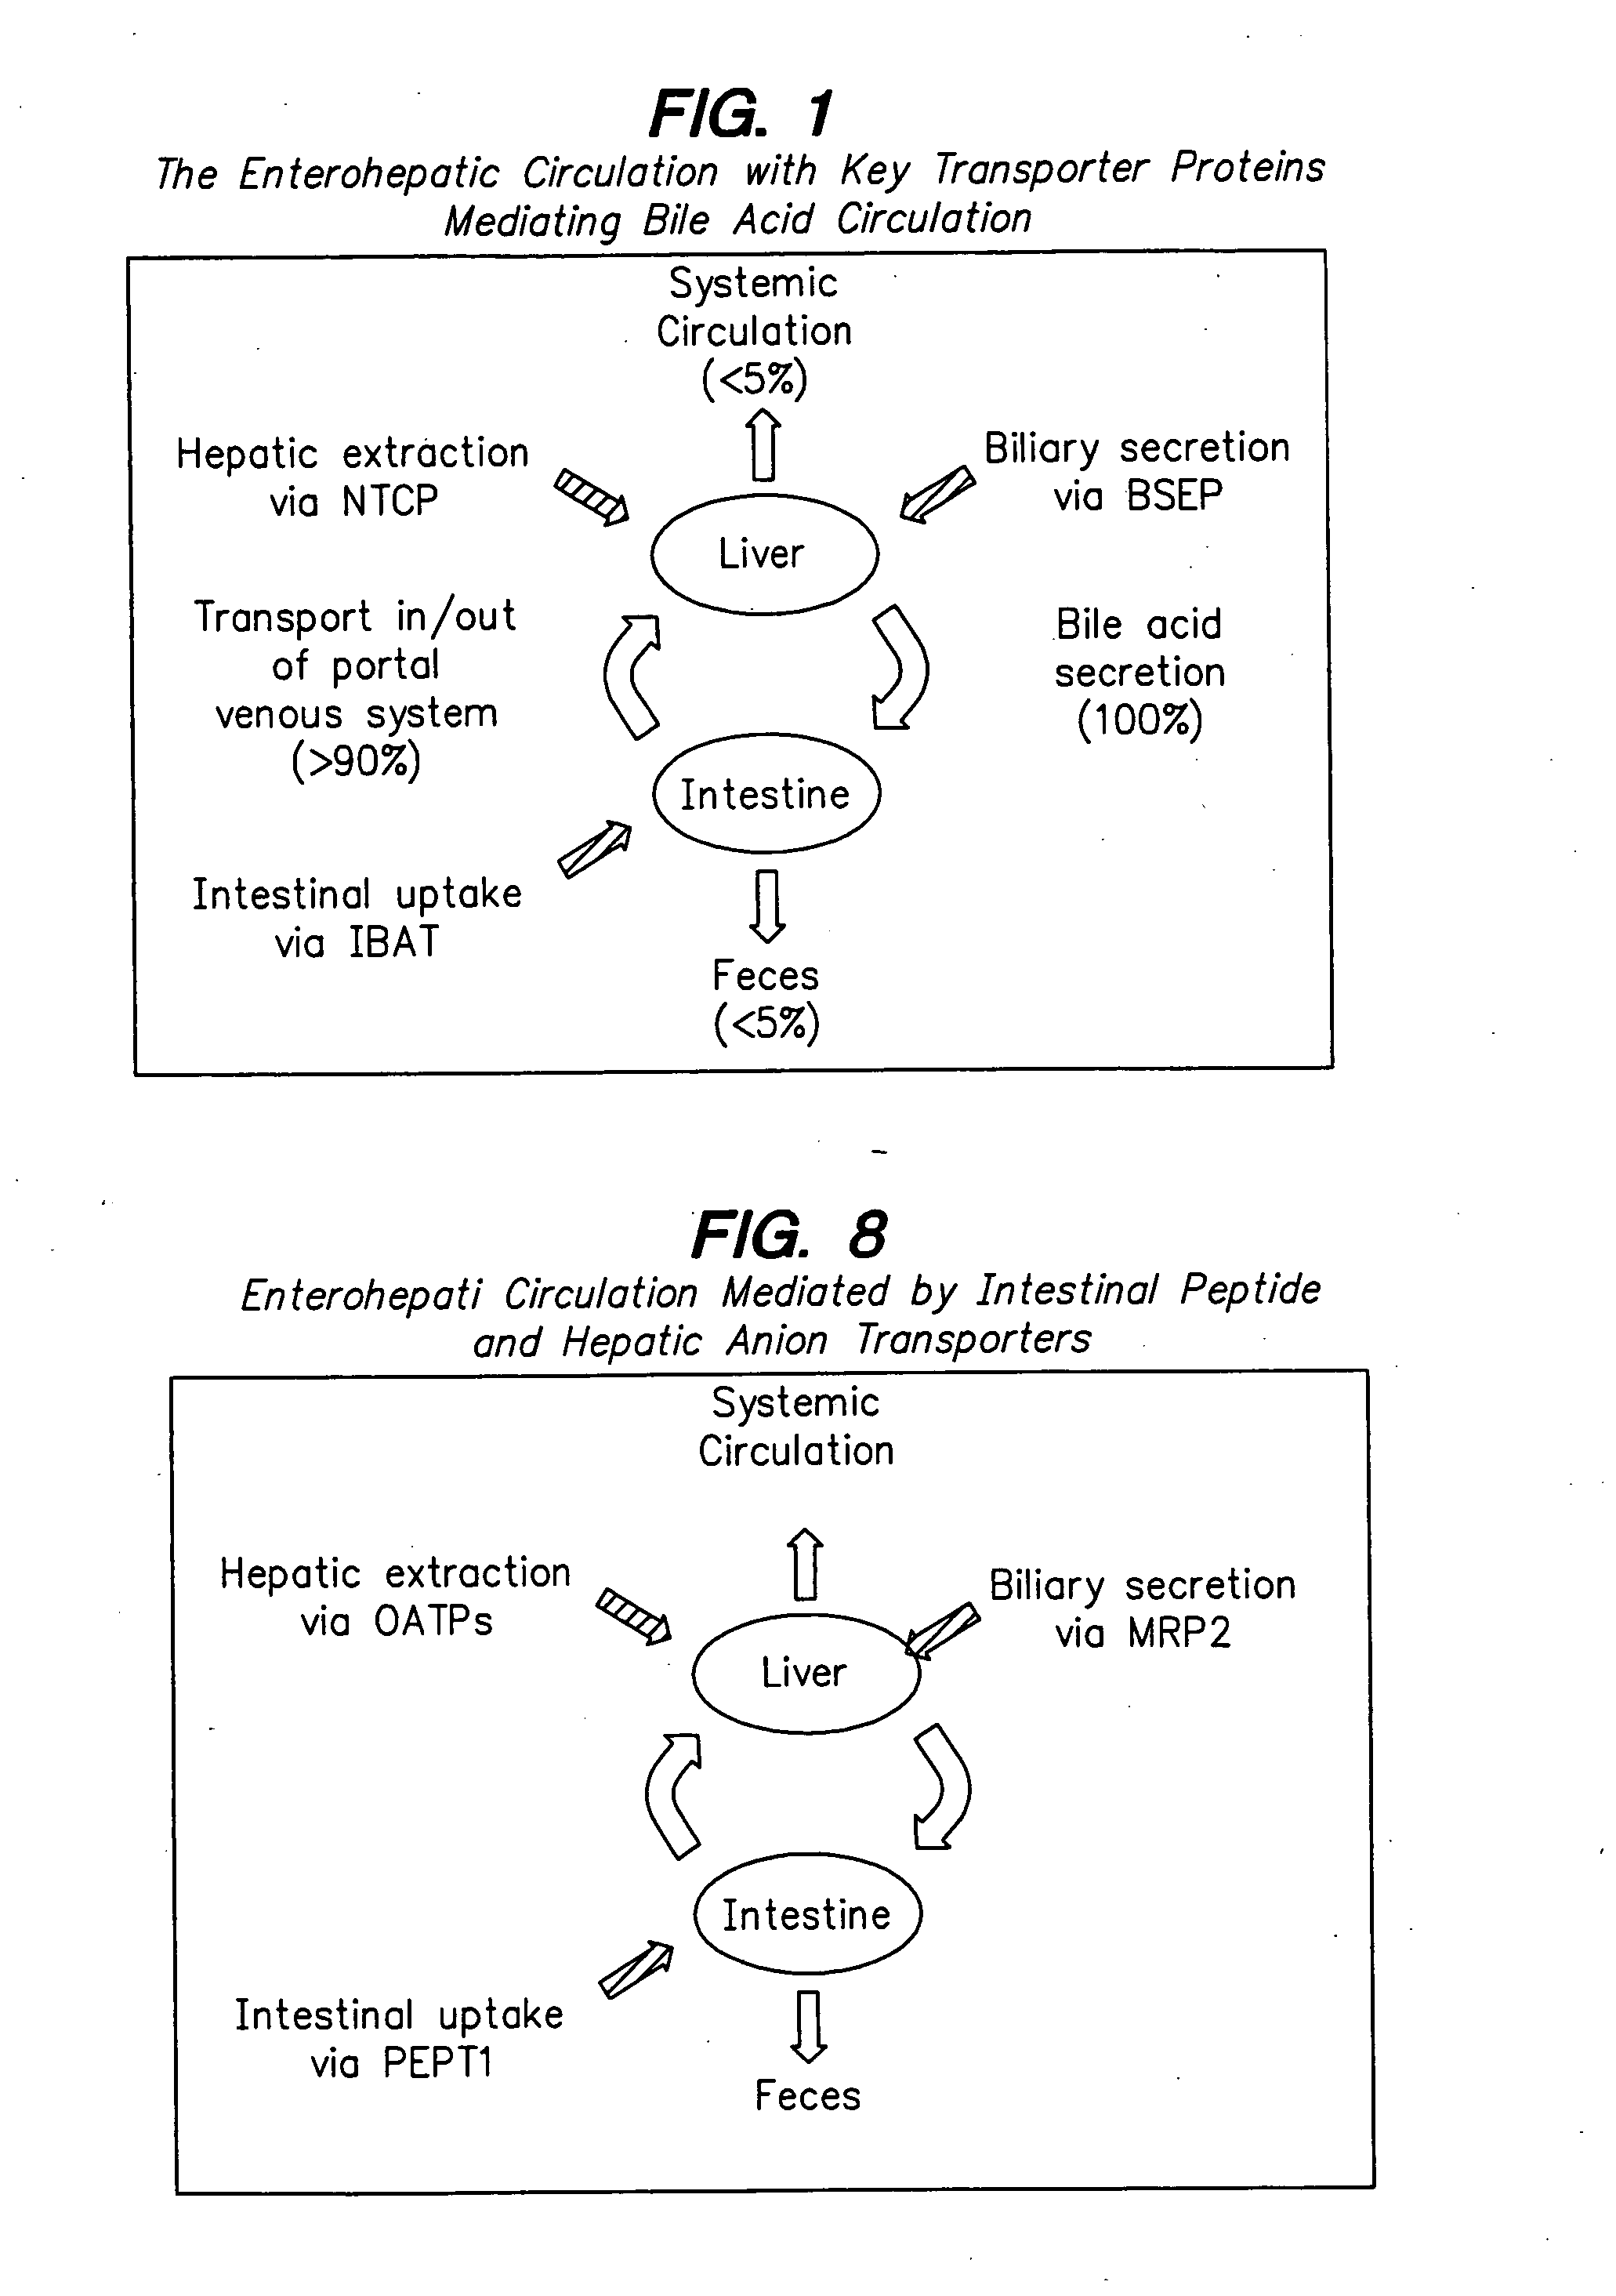 Compounds for sustained release of orally delivered drugs